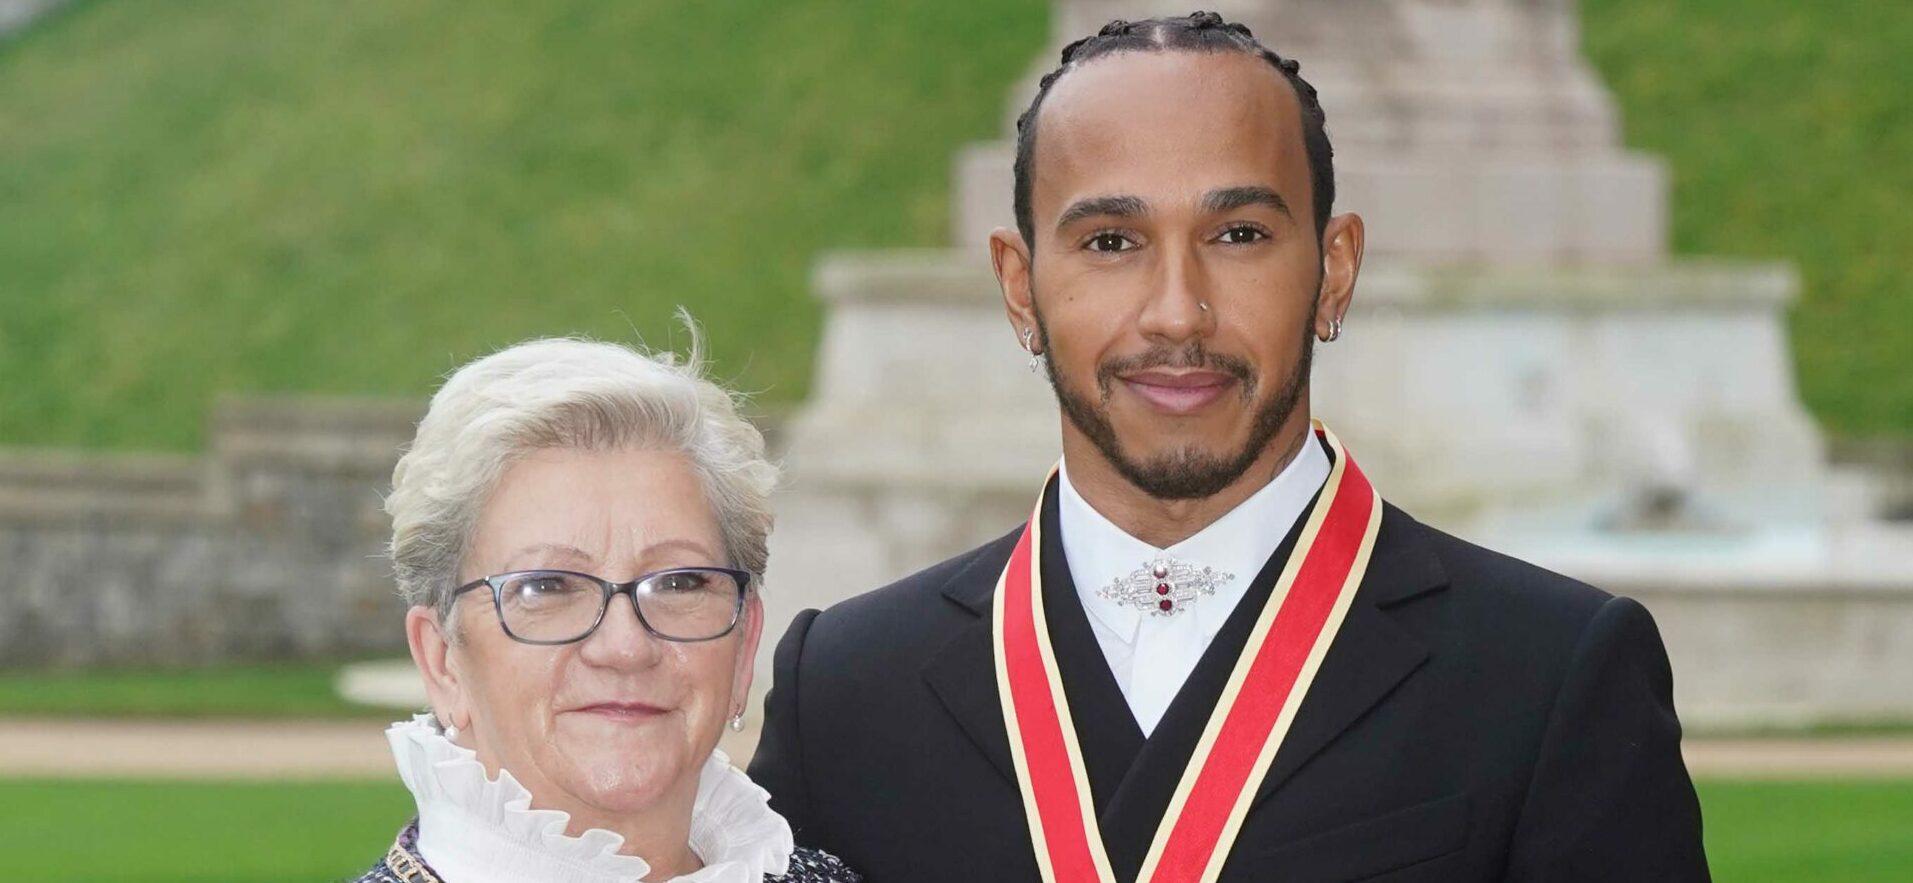 Lewis Hamilton Hopes To Race With Mom’s Surname